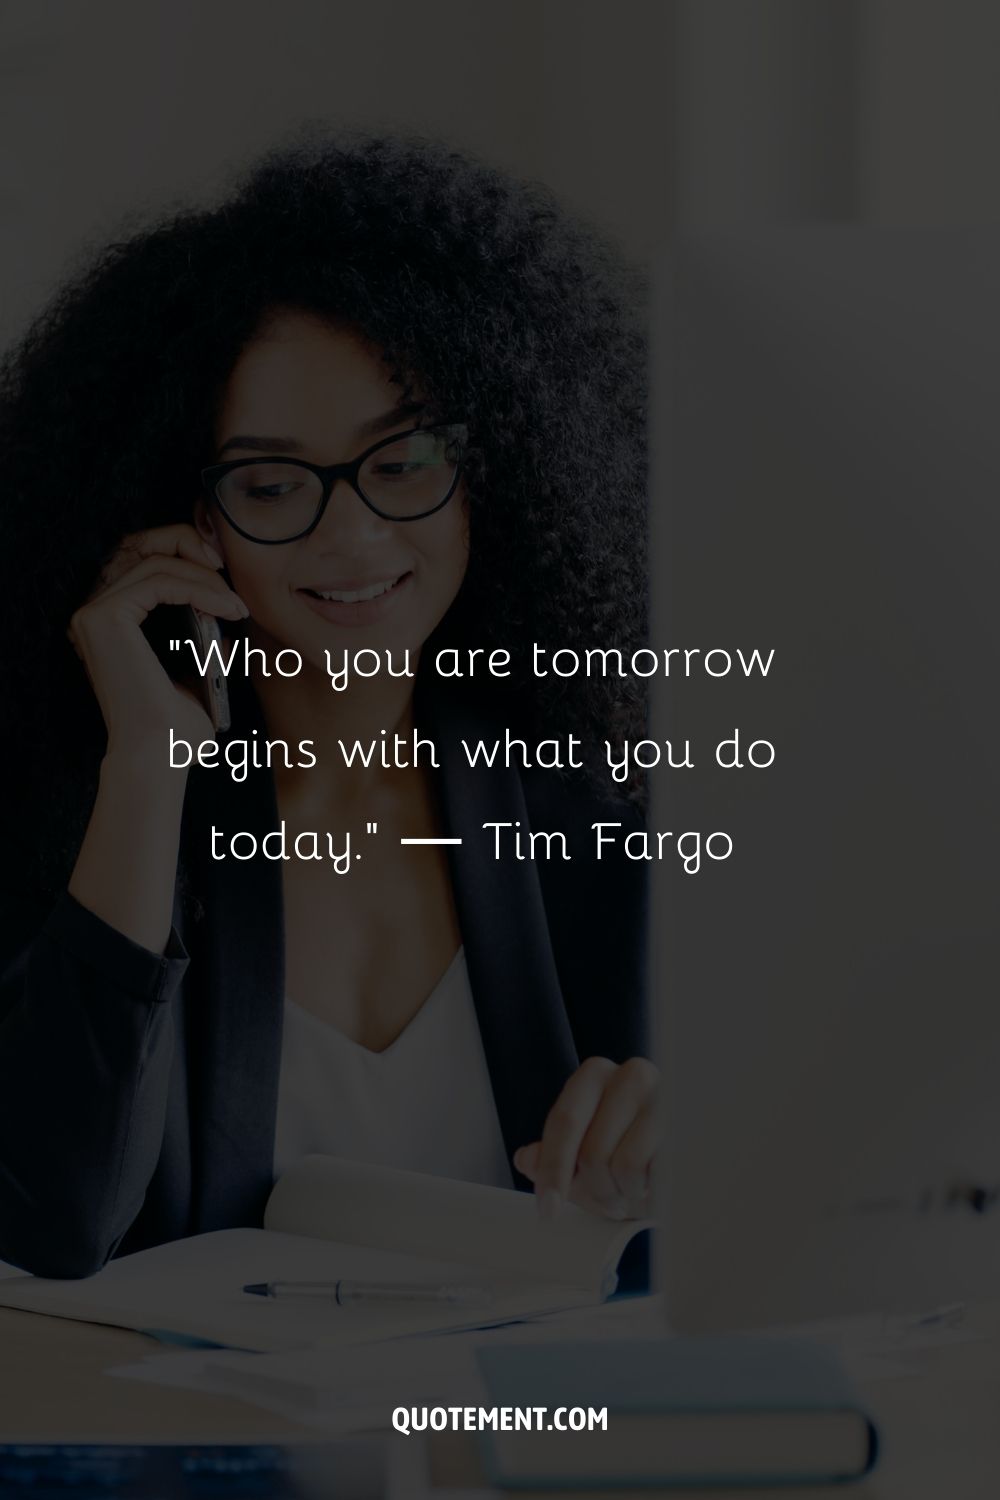 “Who you are tomorrow begins with what you do today.” ― Tim Fargo